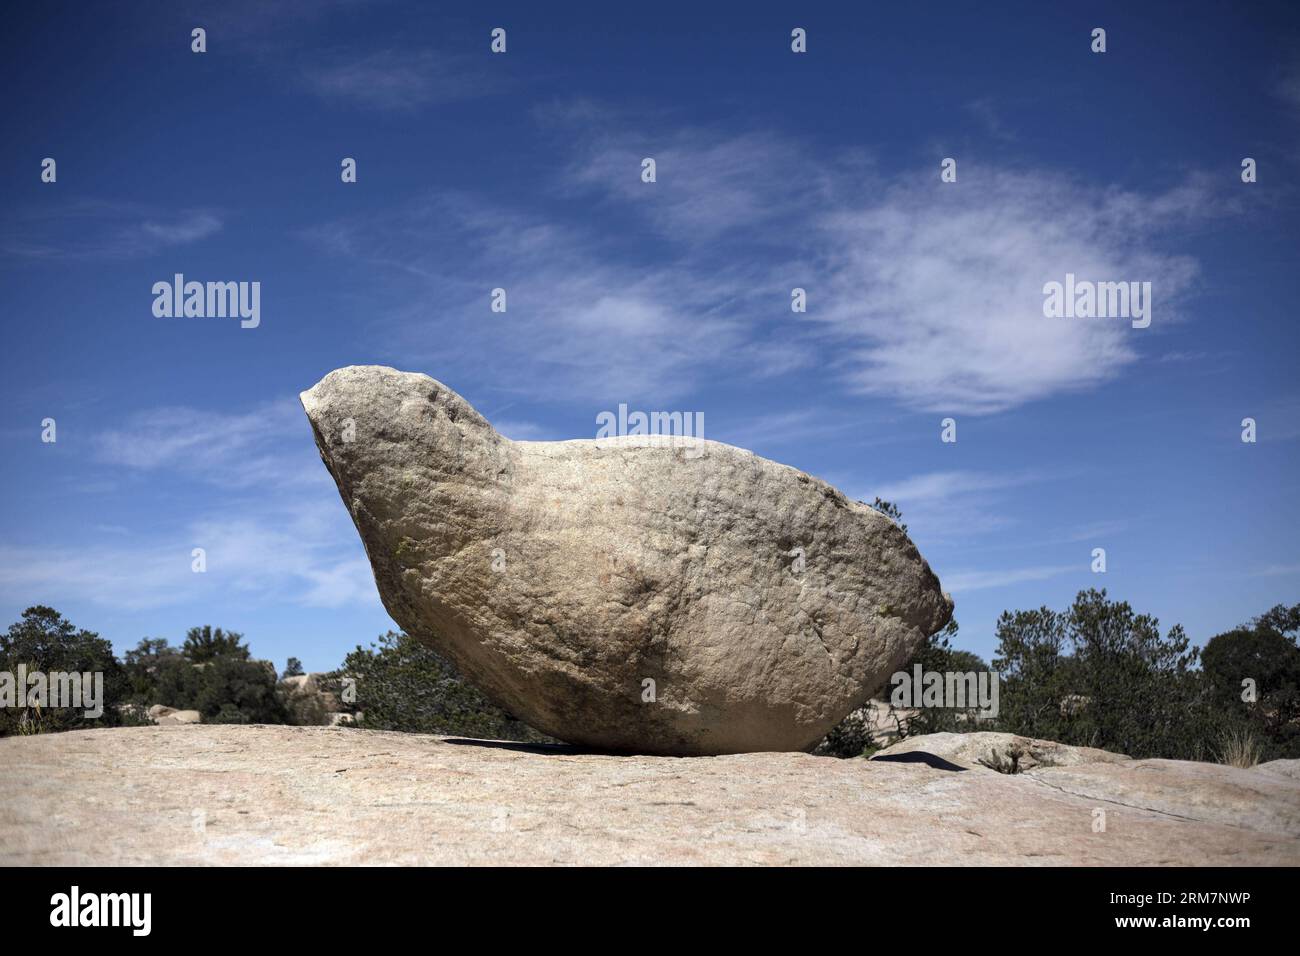 (140311) -- BAJA CALIFORNIA, (Xinhua) -- Image taken on March 9, 2014 shows rock formations at the archaelogical site of El Vallecito near La Rumorosa town Baja California, northwest of Mexico. According to the National Institute of Antropology and History (INAH, its acronym in Spanish), El Vallecito was occupied by members of the Yuman linguistic family, which originally lived in the northwest area of the state of Baja California and southern California. At the site there are rock paintings of simple lines traced with mineral dyes in white, red, black and yellow. (Xinhua/Guillermo Arias) MEXI Stock Photo